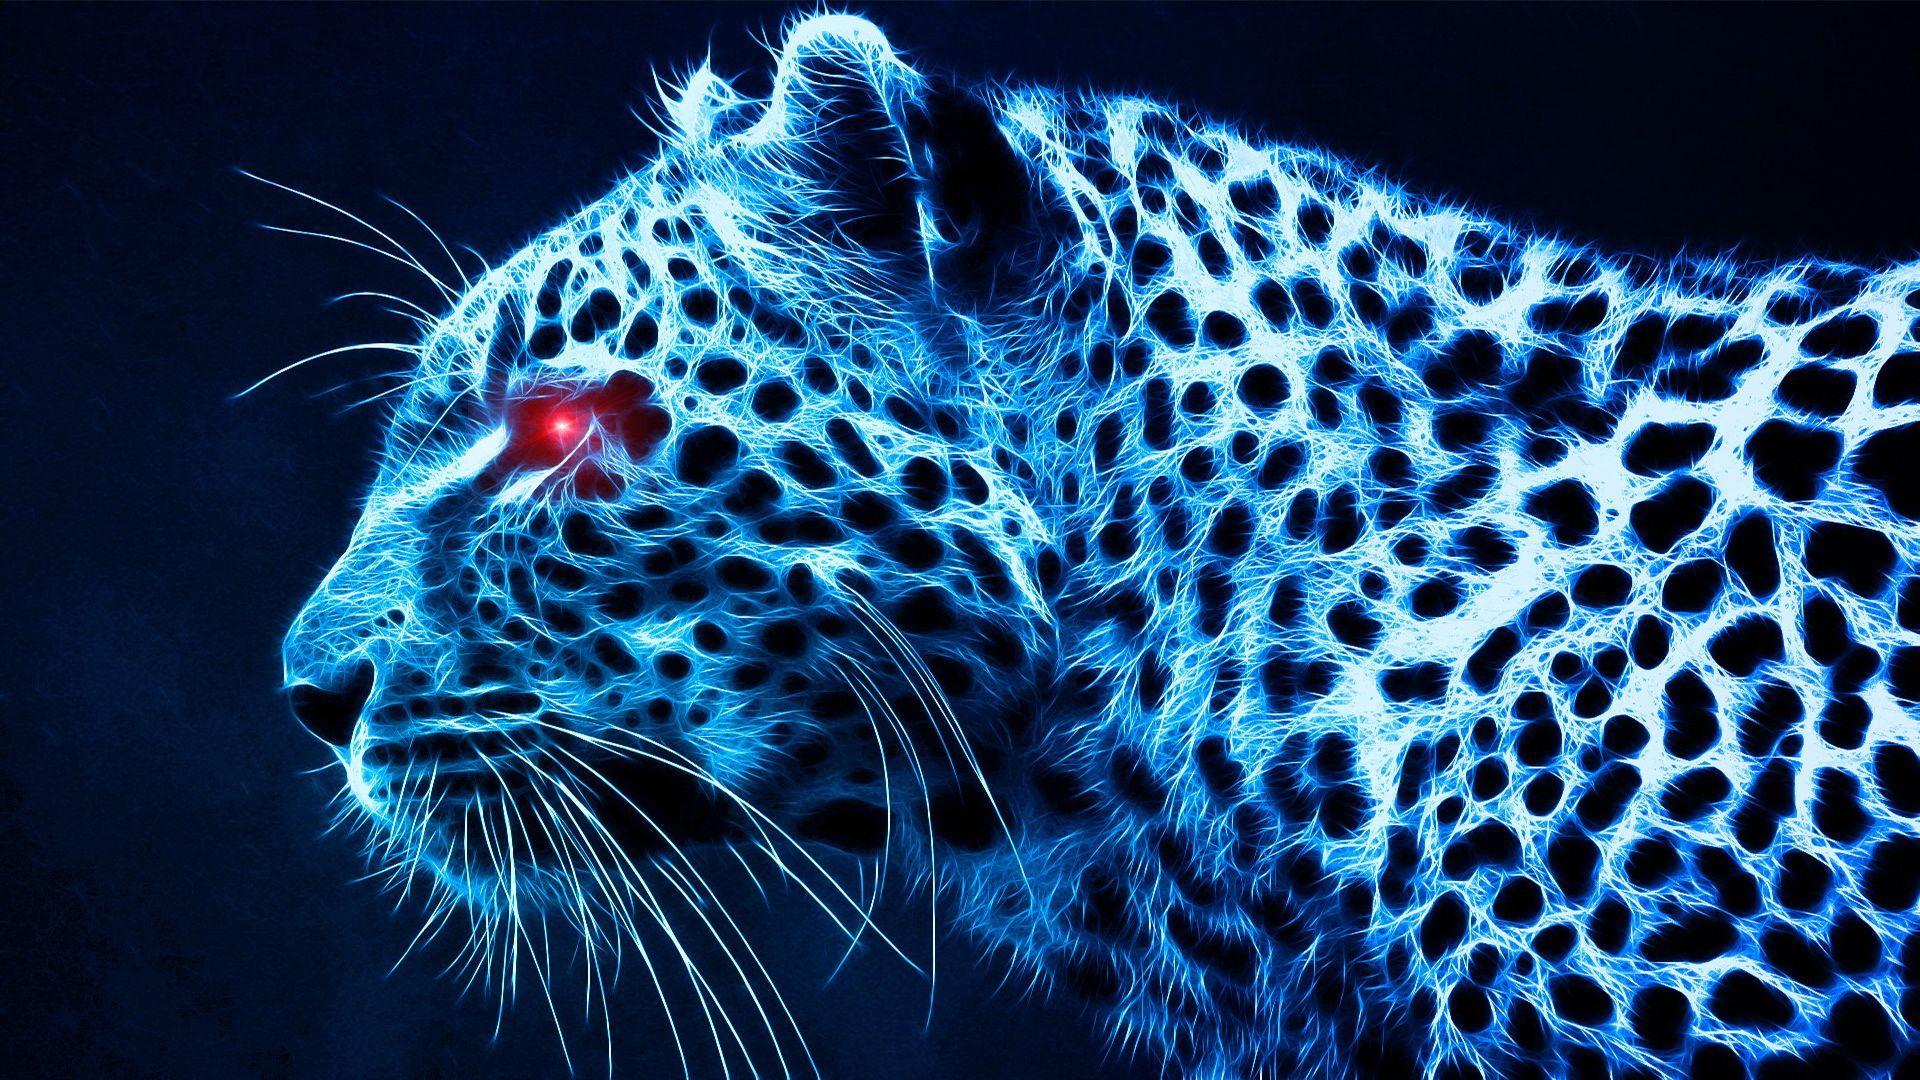 500 Cheetah Pictures HD  Download Free Images on Unsplash